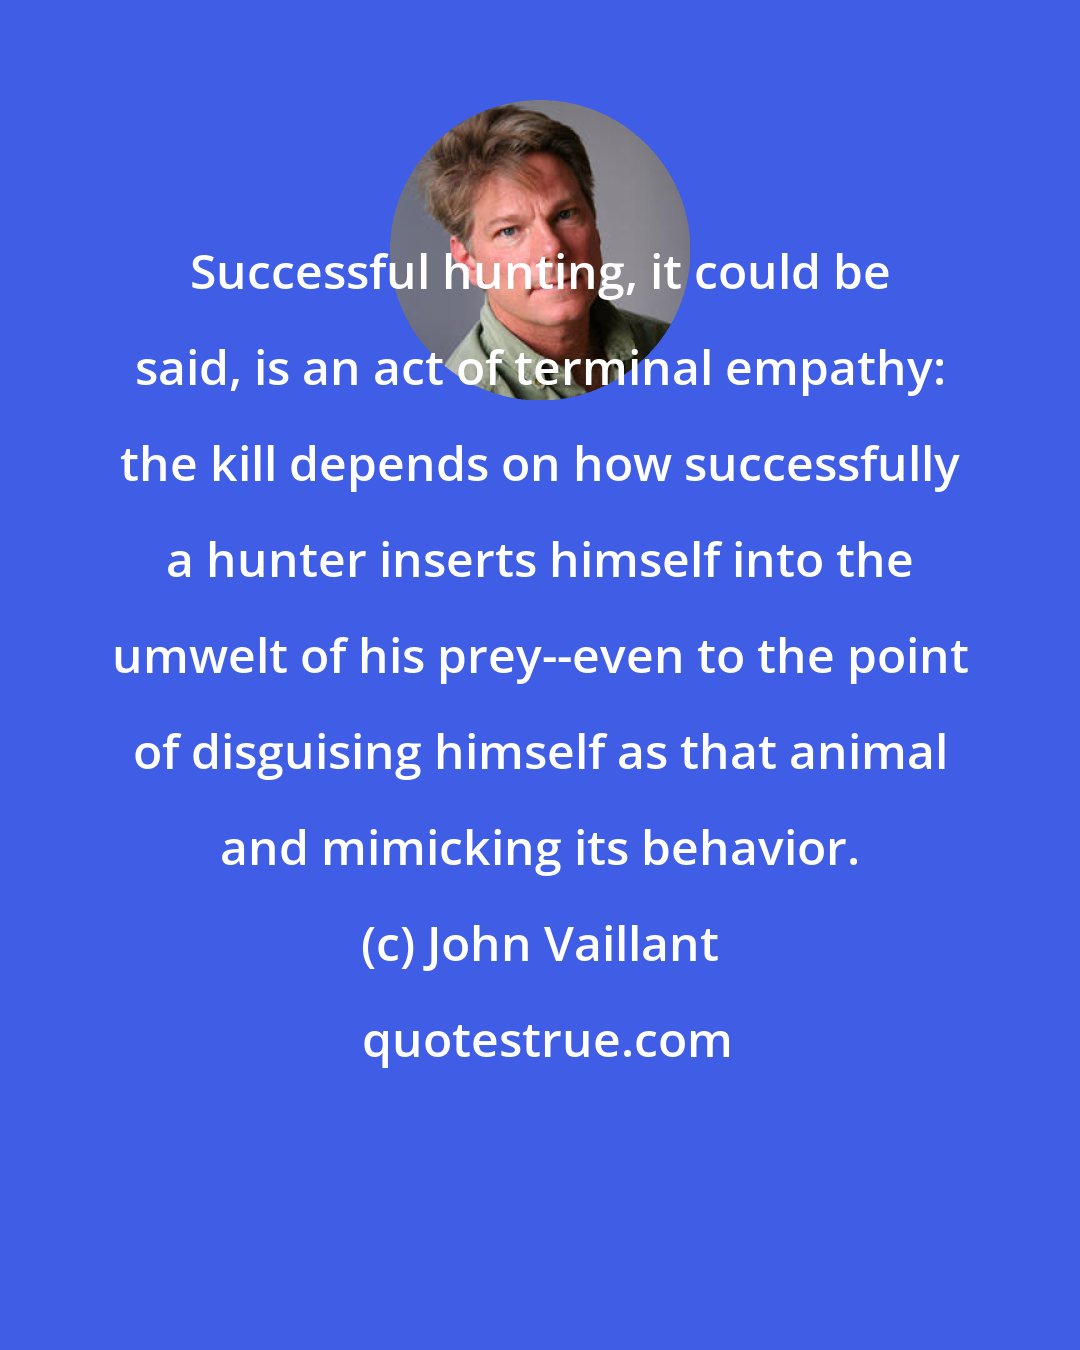 John Vaillant: Successful hunting, it could be said, is an act of terminal empathy: the kill depends on how successfully a hunter inserts himself into the umwelt of his prey--even to the point of disguising himself as that animal and mimicking its behavior.